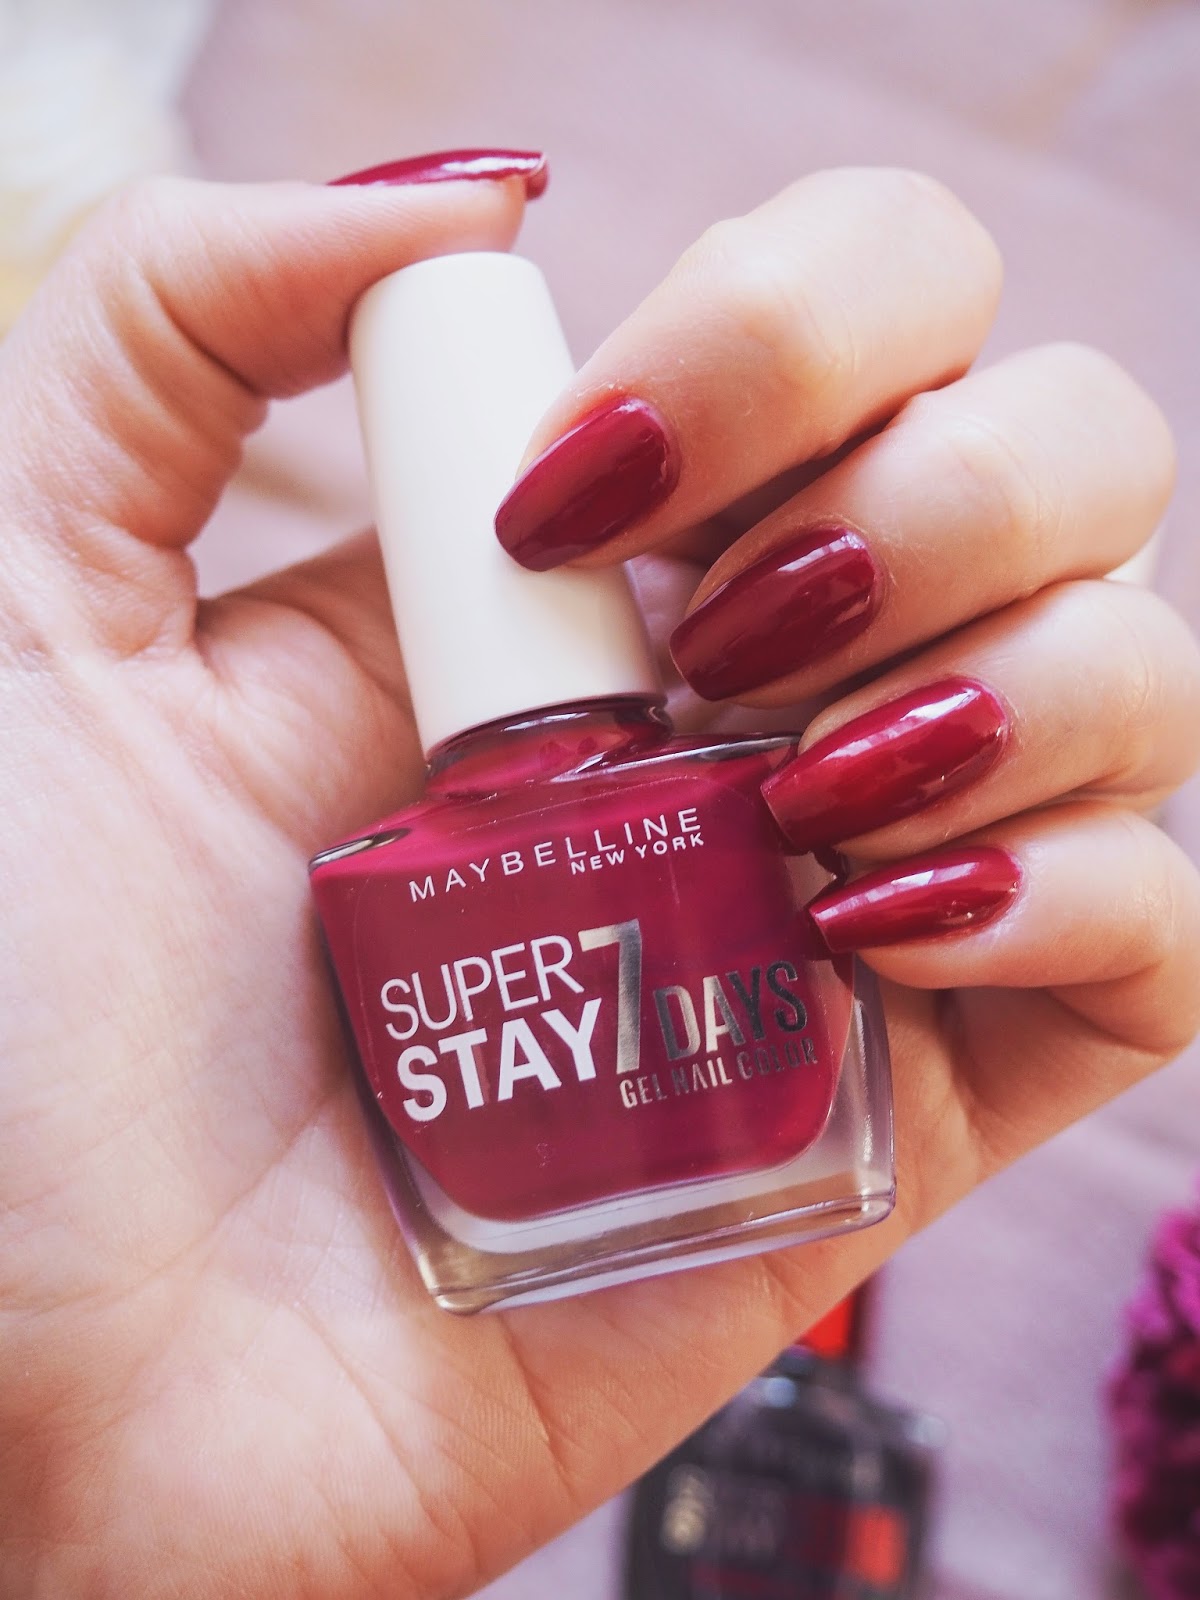 Promise Nail Maybelline Color: Gel | Days 7-Day Scalfi♥ True? 7 Superstay Pam